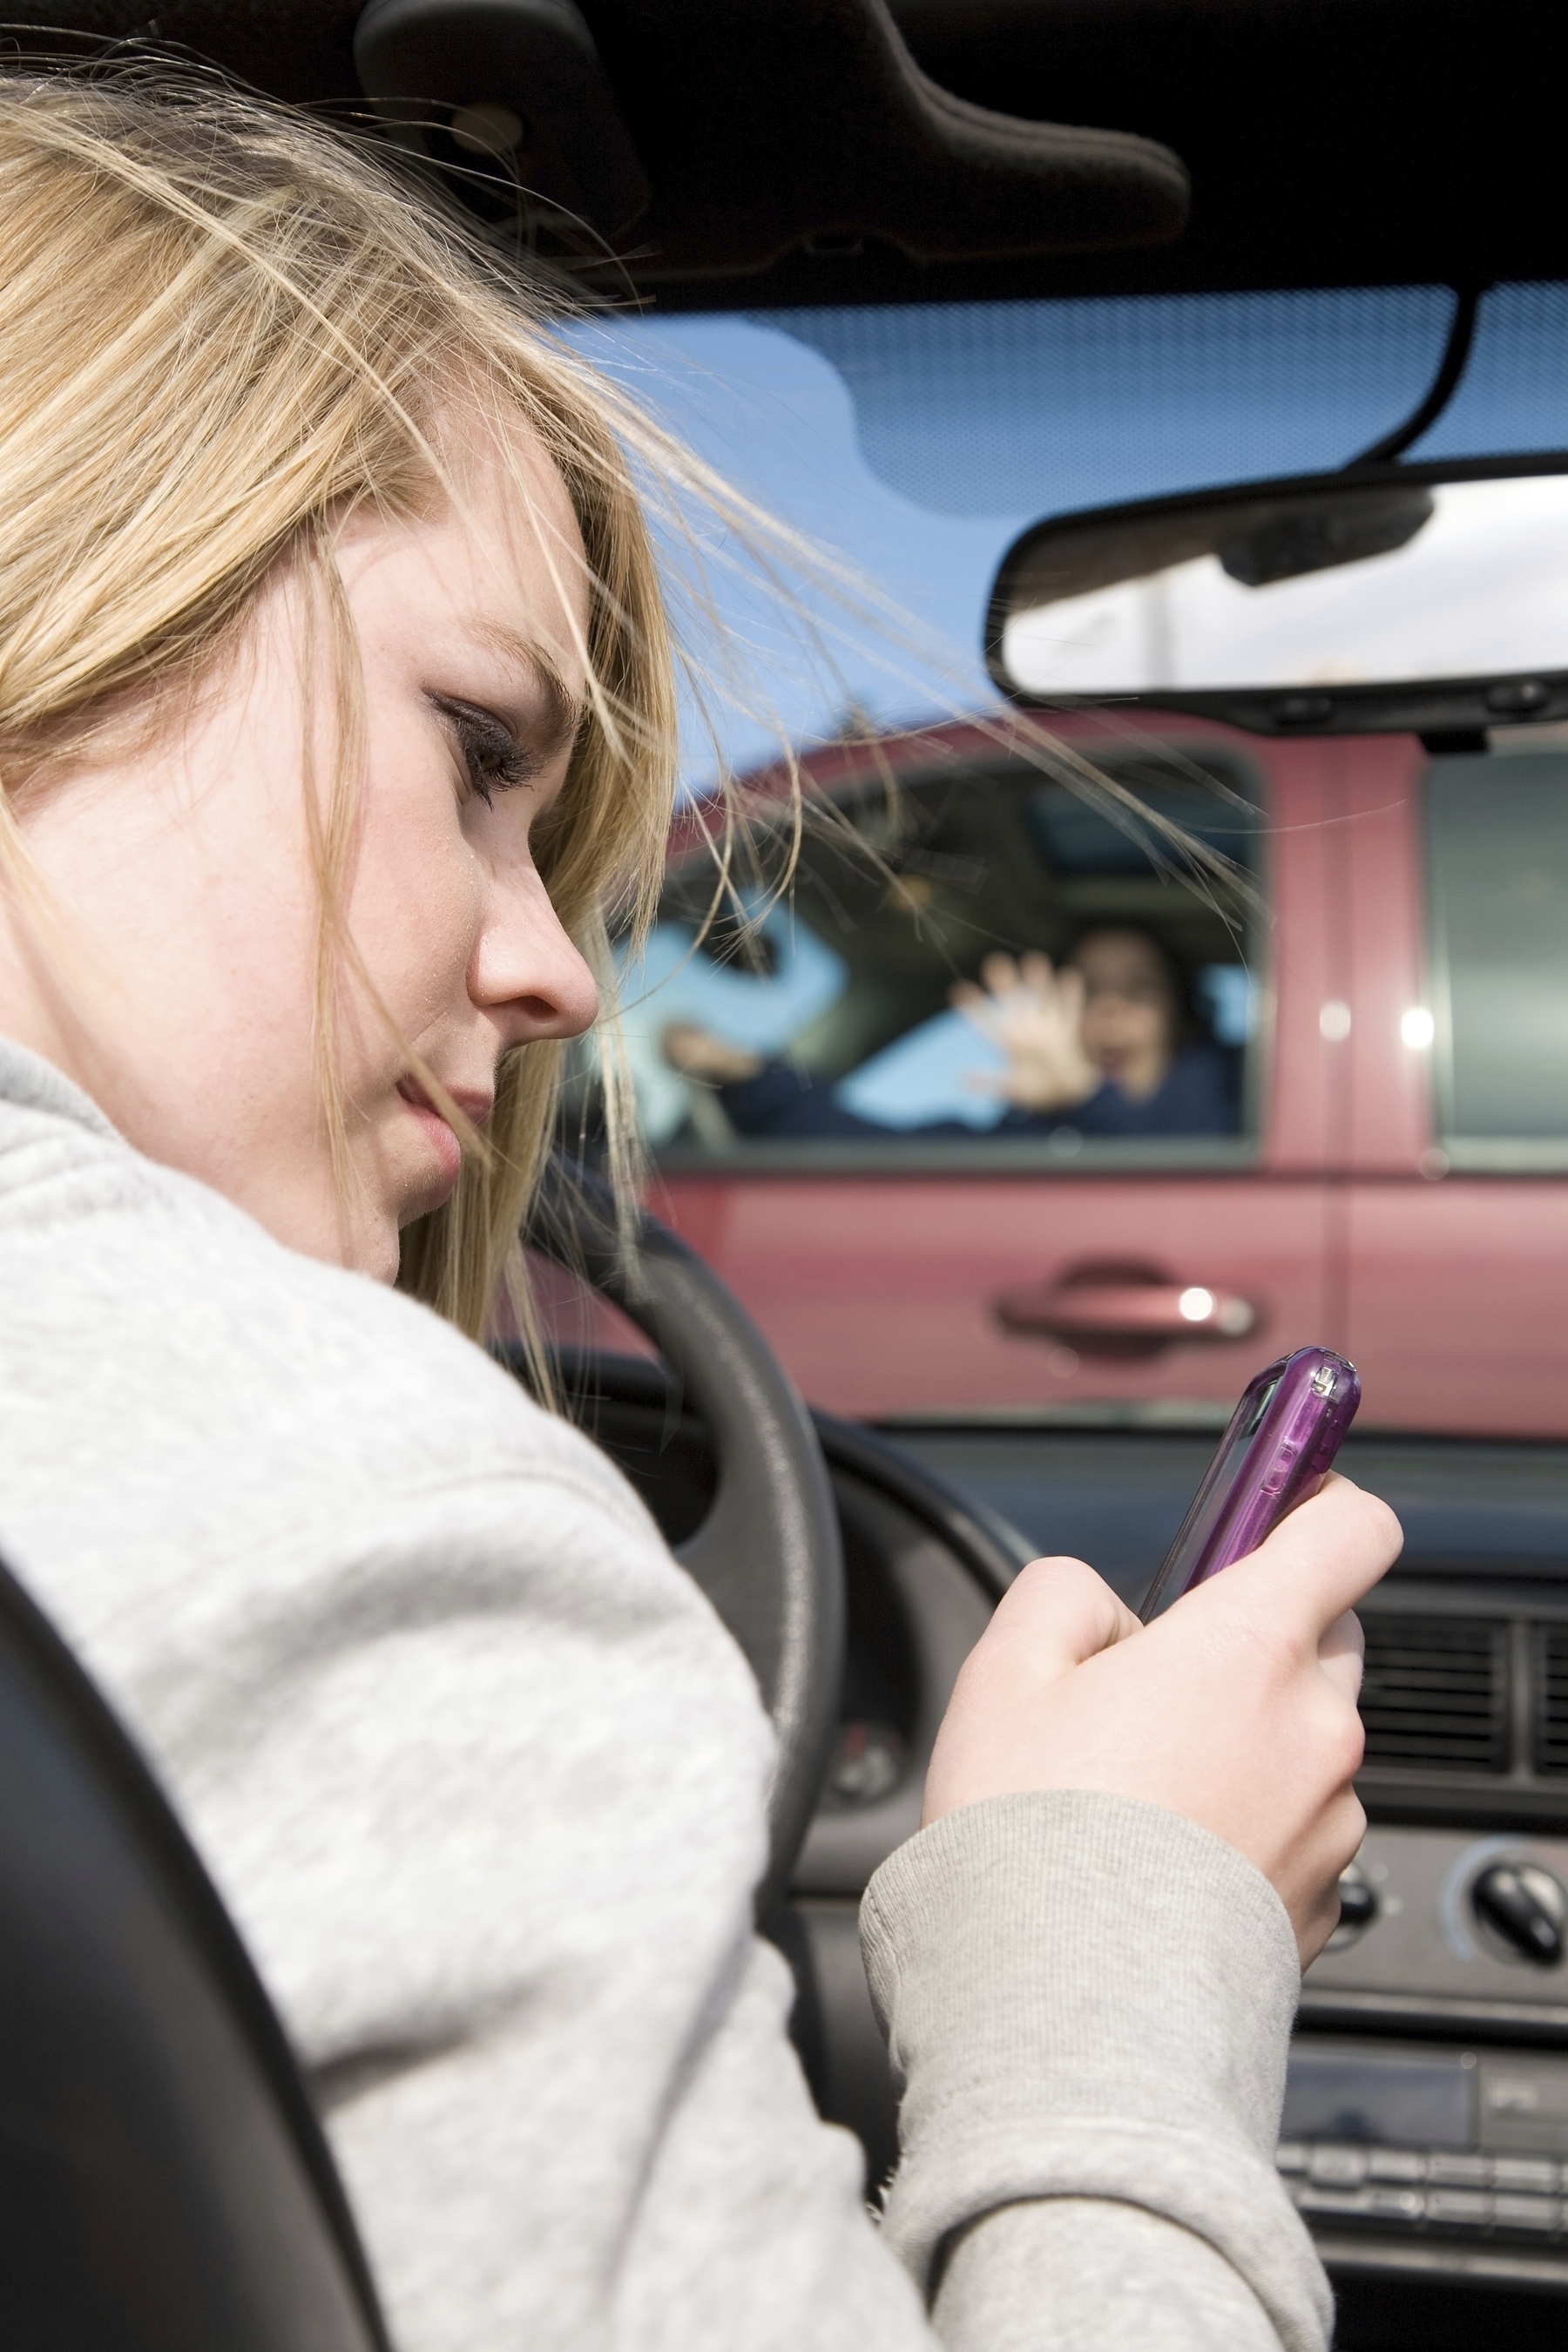 Good2Go(R) Auto Insurance introduces the Cell Phone Safety Discount for drivers who install text blocking devices to reward drivers taking action to be safer and more responsible on the road. This image must be used in conjunction with the news release with which it was originally distributed. alanpoulson/iStock/GettyImages.